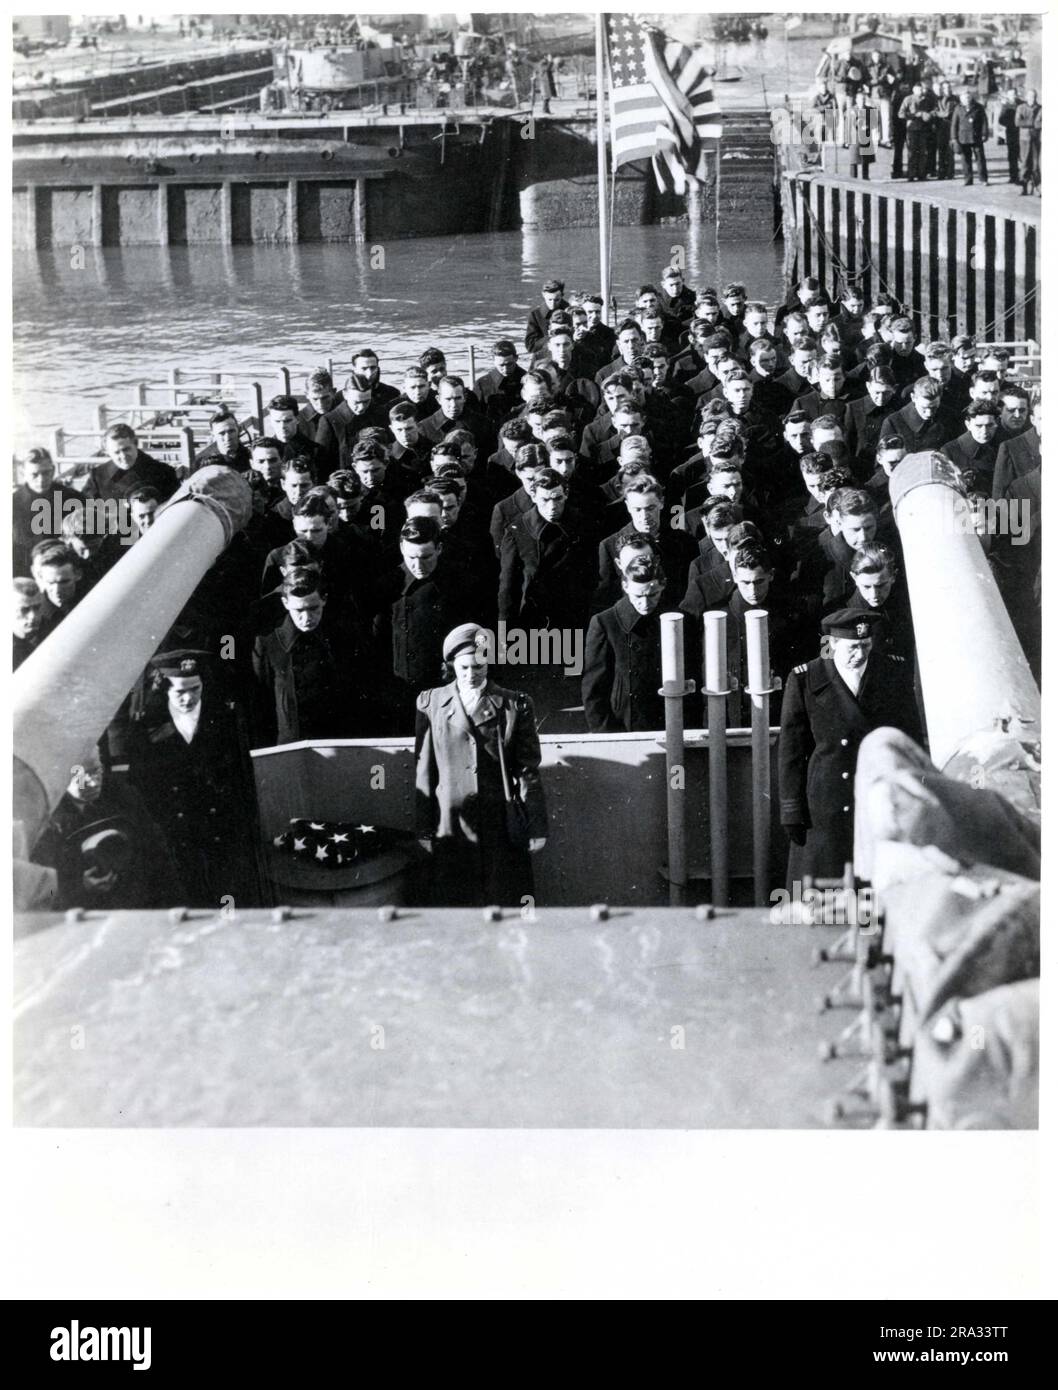 USS Higbe Commissioning. This photograph depicts the commissioning of the USS Higbe, which is the first combat vessel named after a Navy nurse, Lieutenant Commander Lindquist. 1946 - 1946. Northeast Region (Boston, MA). Photographic Print. Department of the Navy. First Naval District. Office of the Assistant Chief of Staff for Administration. Office of the Historical Officer. ca. 1941-ca. 1946. Administrative History of the First Naval District in World War II Stock Photo